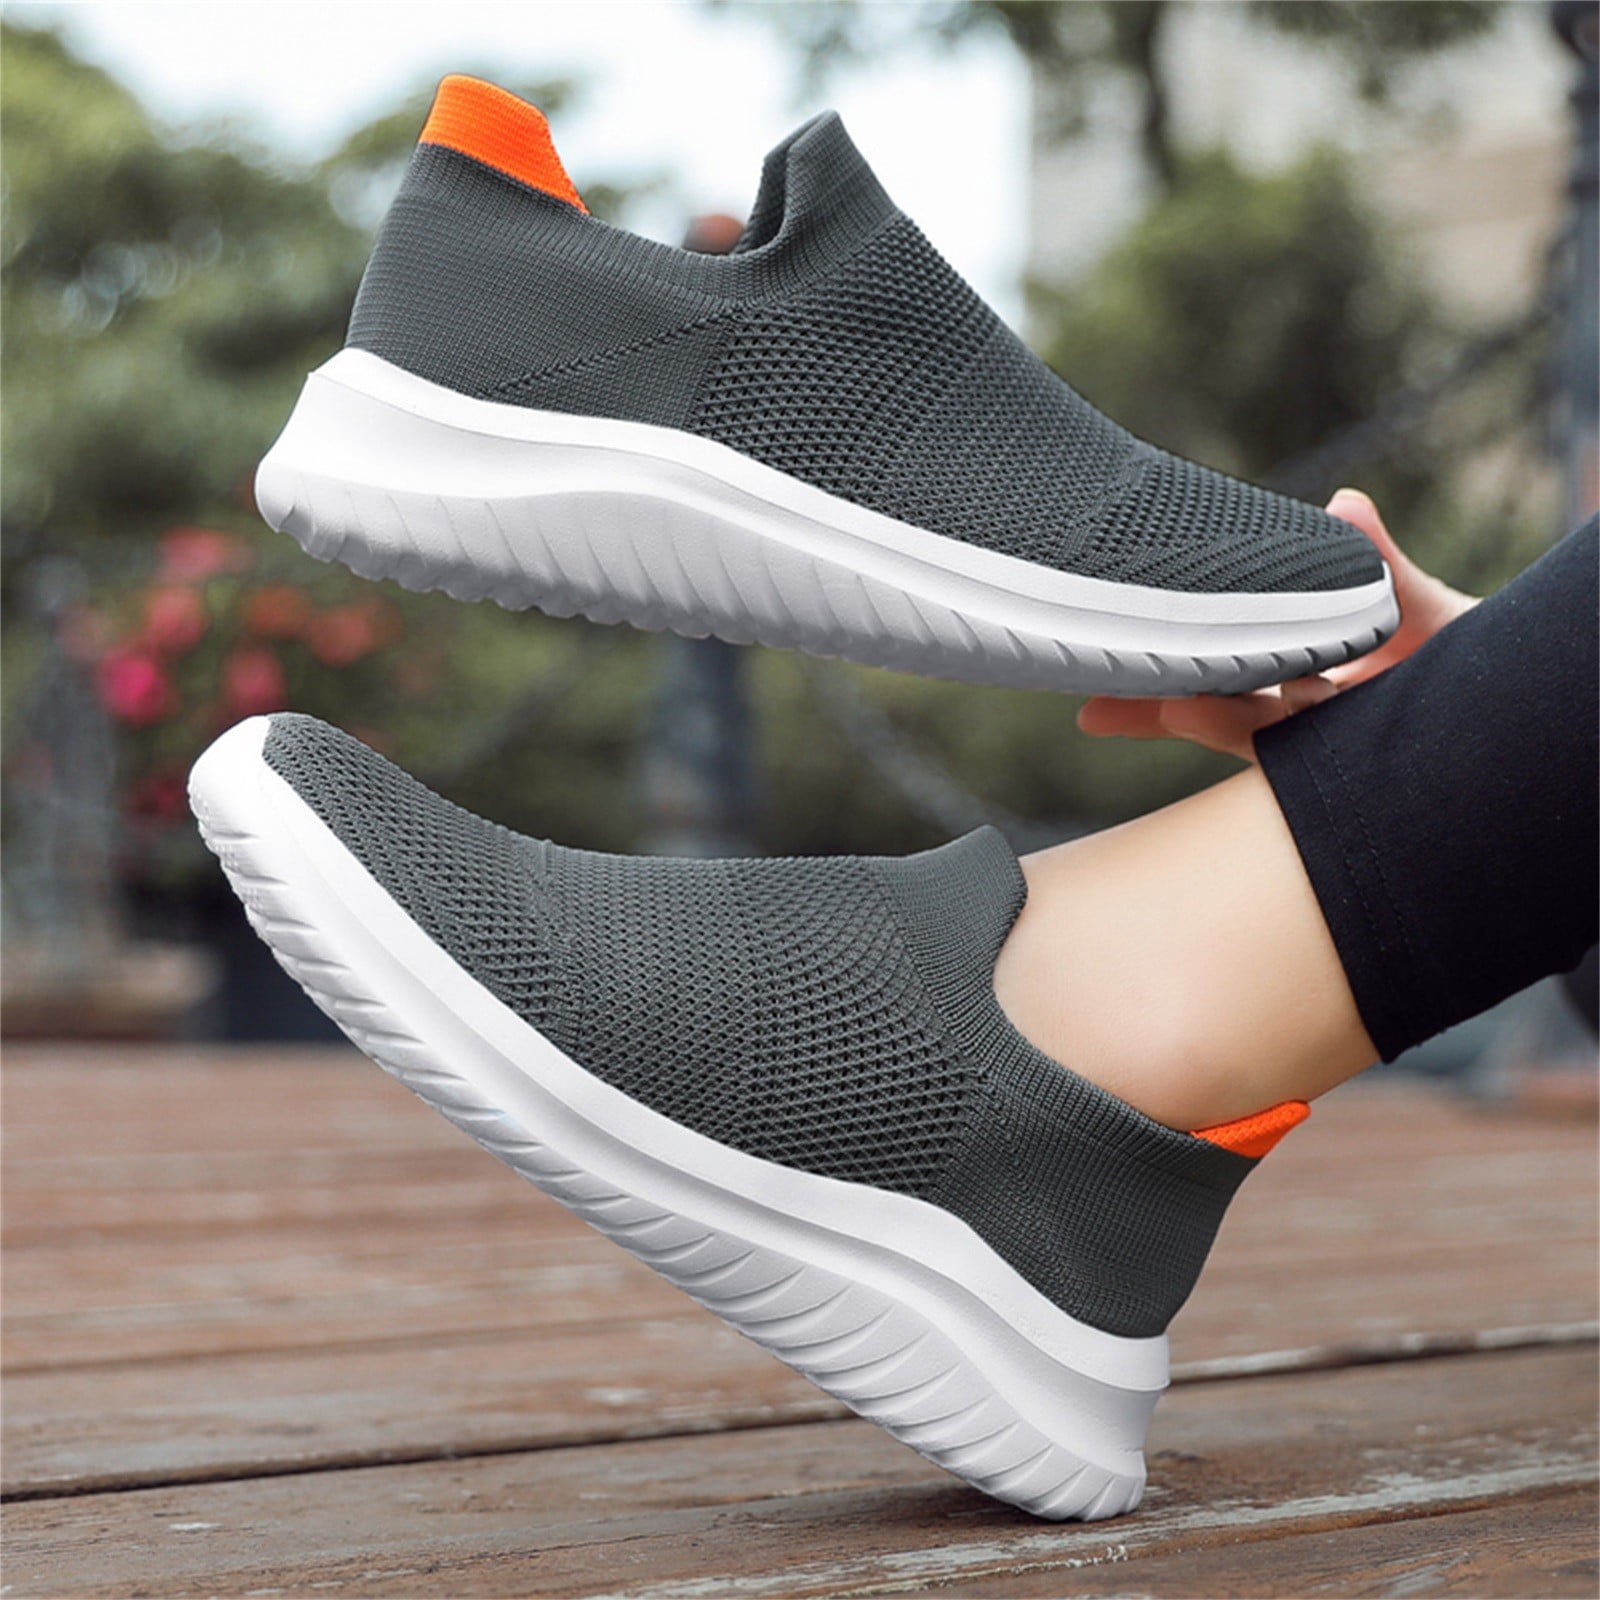 15 Most Comfortable Walking Shoes — Best Walking Shoes for Women